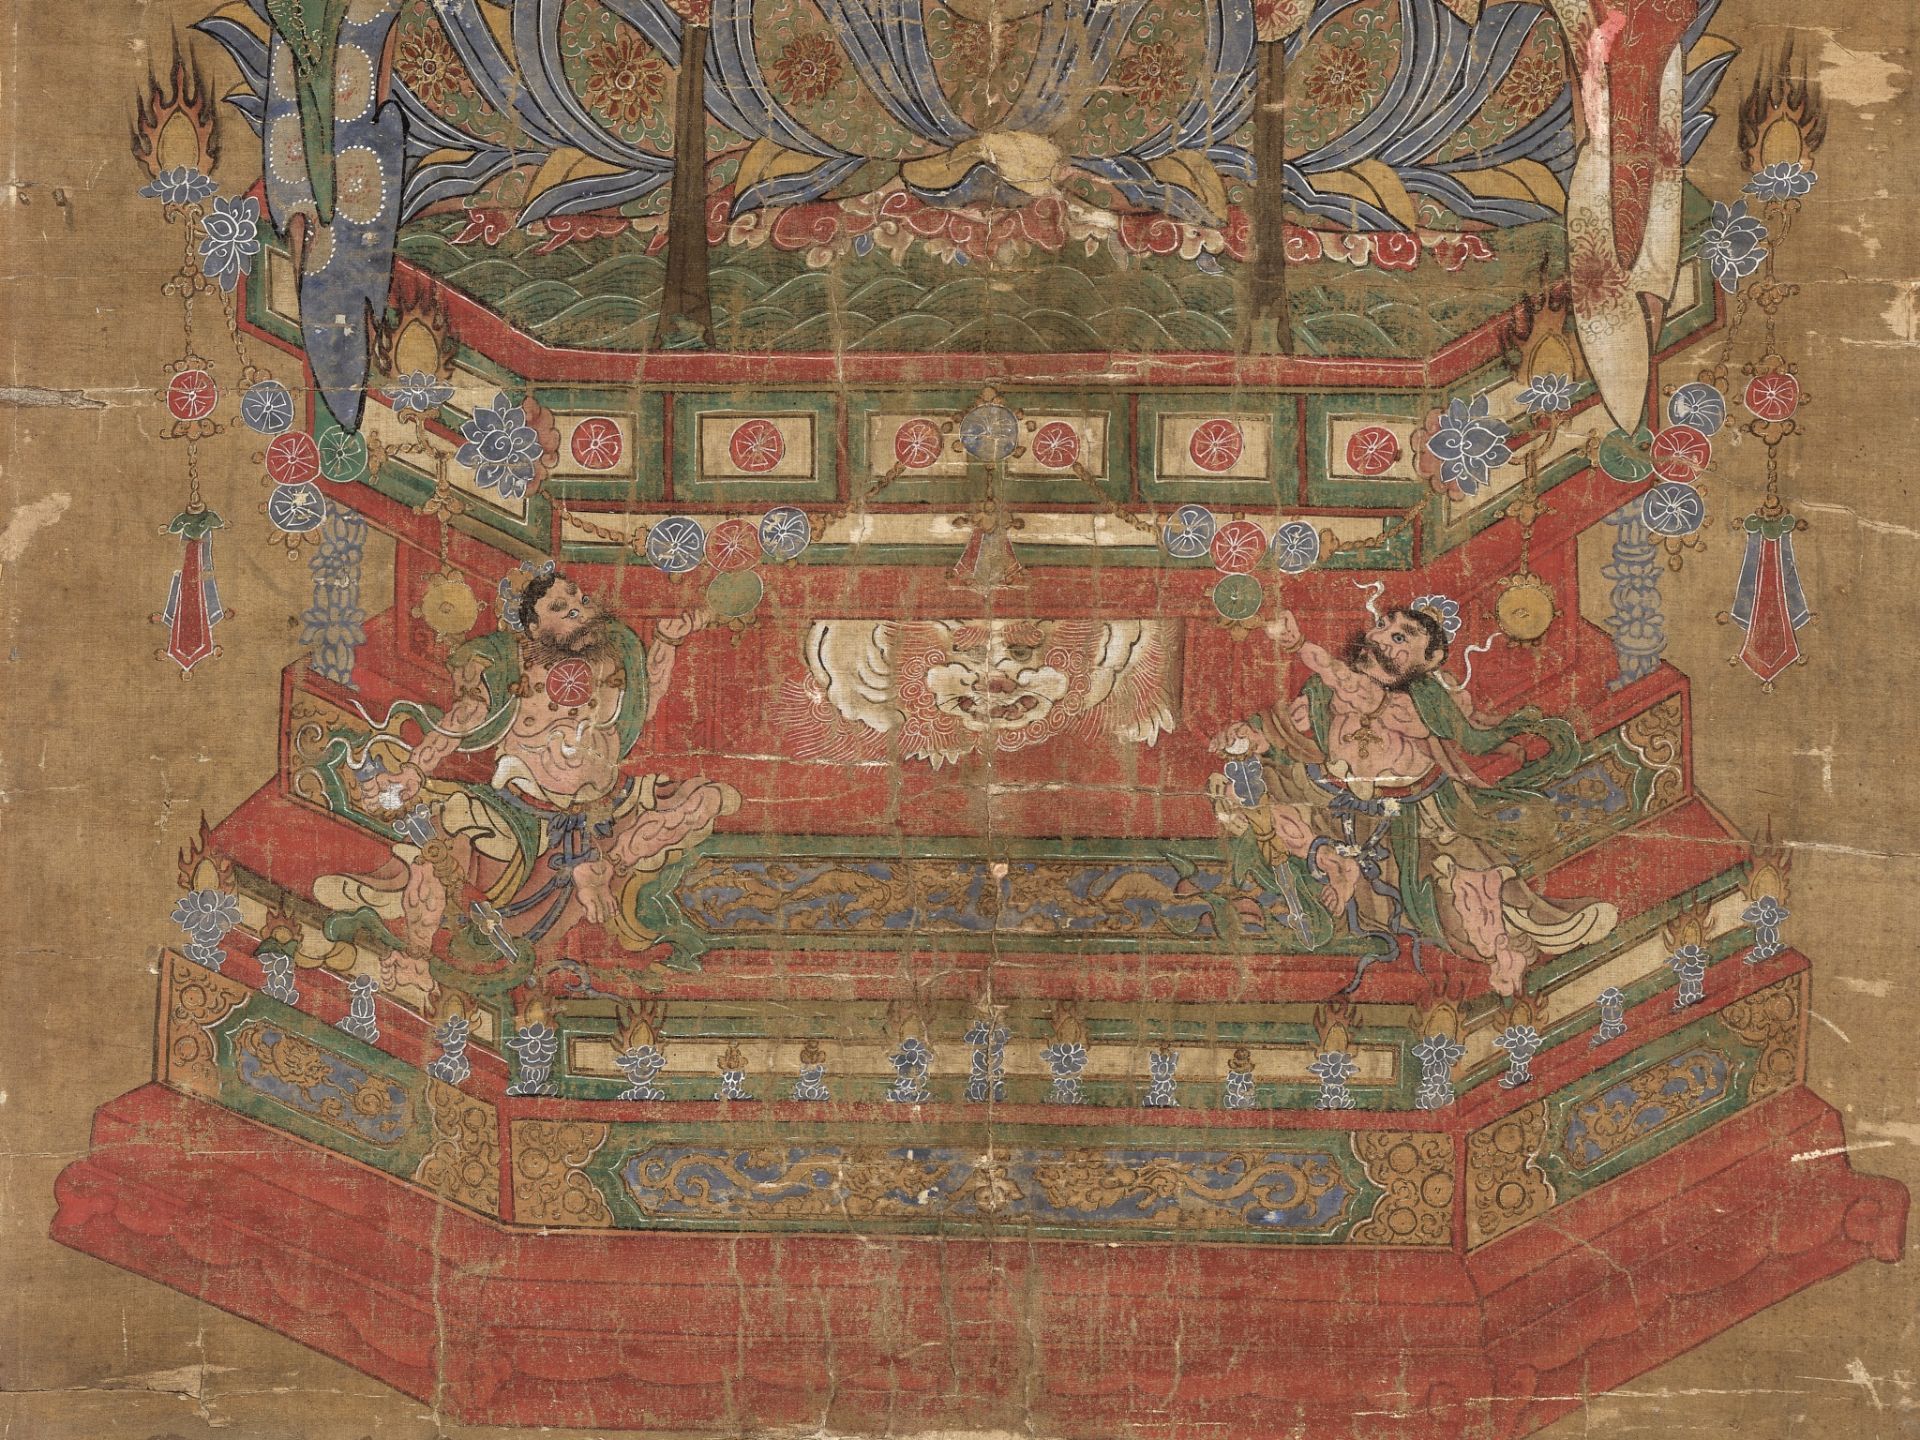 AN IMPORTANT BUDDHIST VOTIVE PAINTING DEPICTING BUDDHA, EARLY MING DYNASTY, 1400-1450 - Bild 3 aus 10